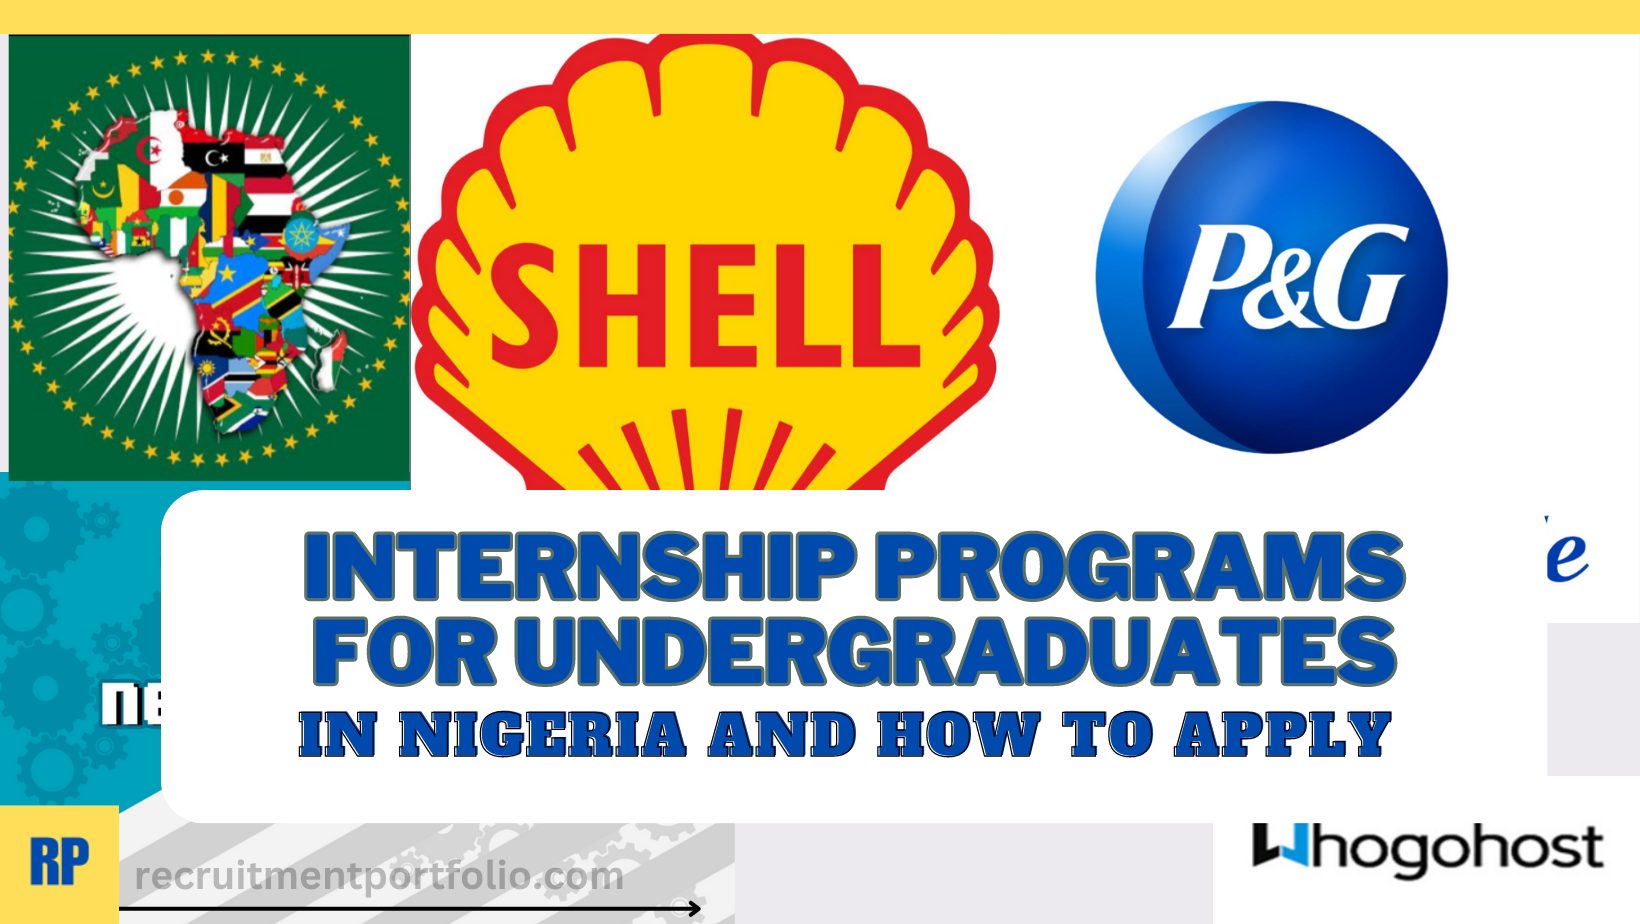 Internship Programs for Undergraduates in Nigeria and How to Apply